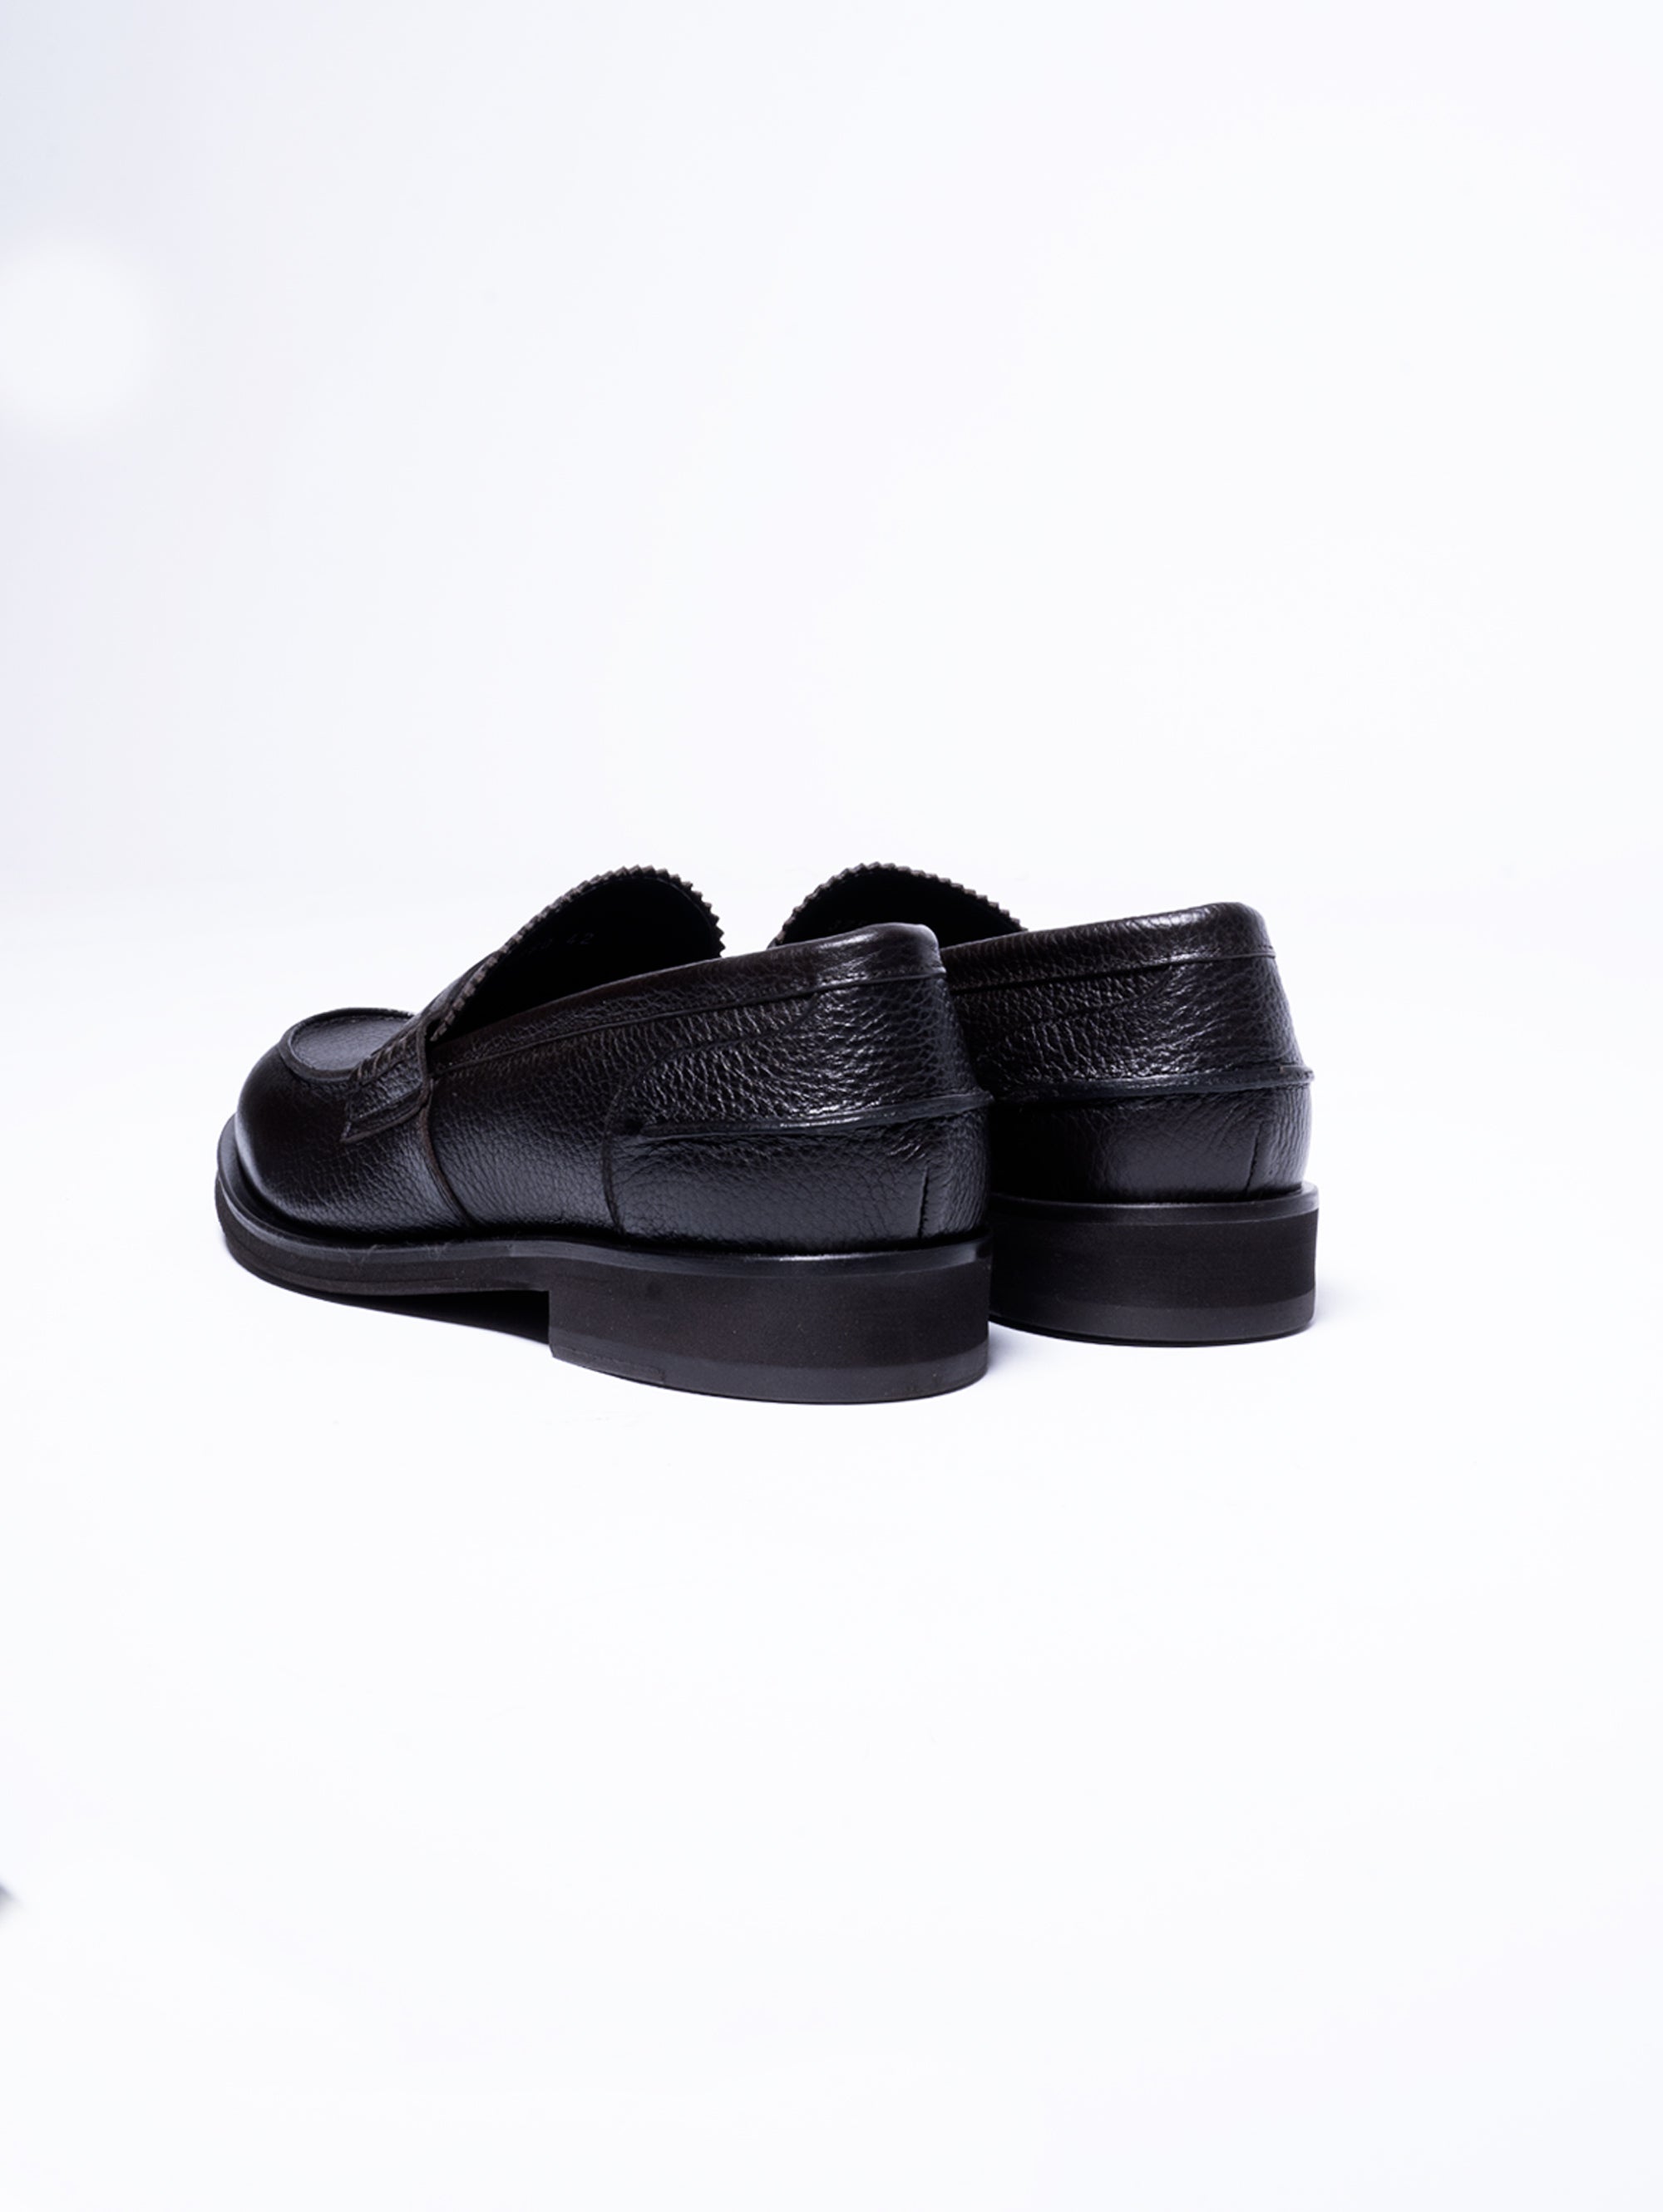 Penny Loafer Moccasin in Dark Brown Grained Leather